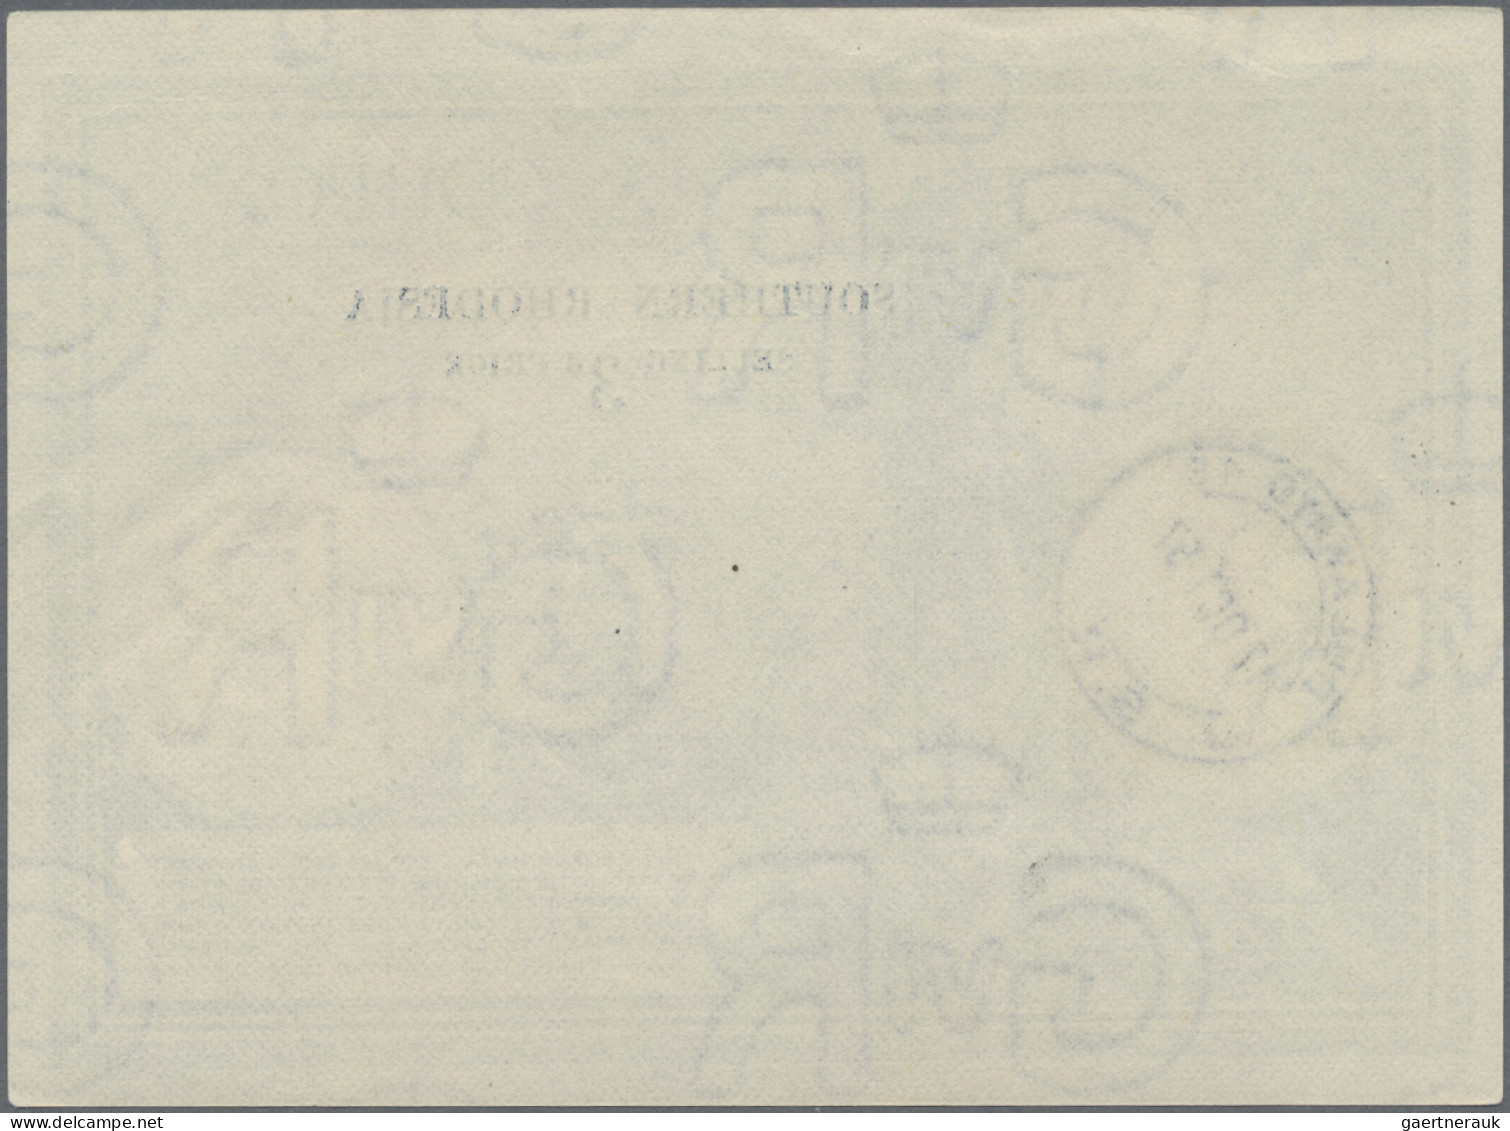 Southern Rhodesia: 1957 Imperial Reply Coupon 3d. With "BULAWAYO/17 OCT 57" C.d. - Rhodésie Du Sud (...-1964)